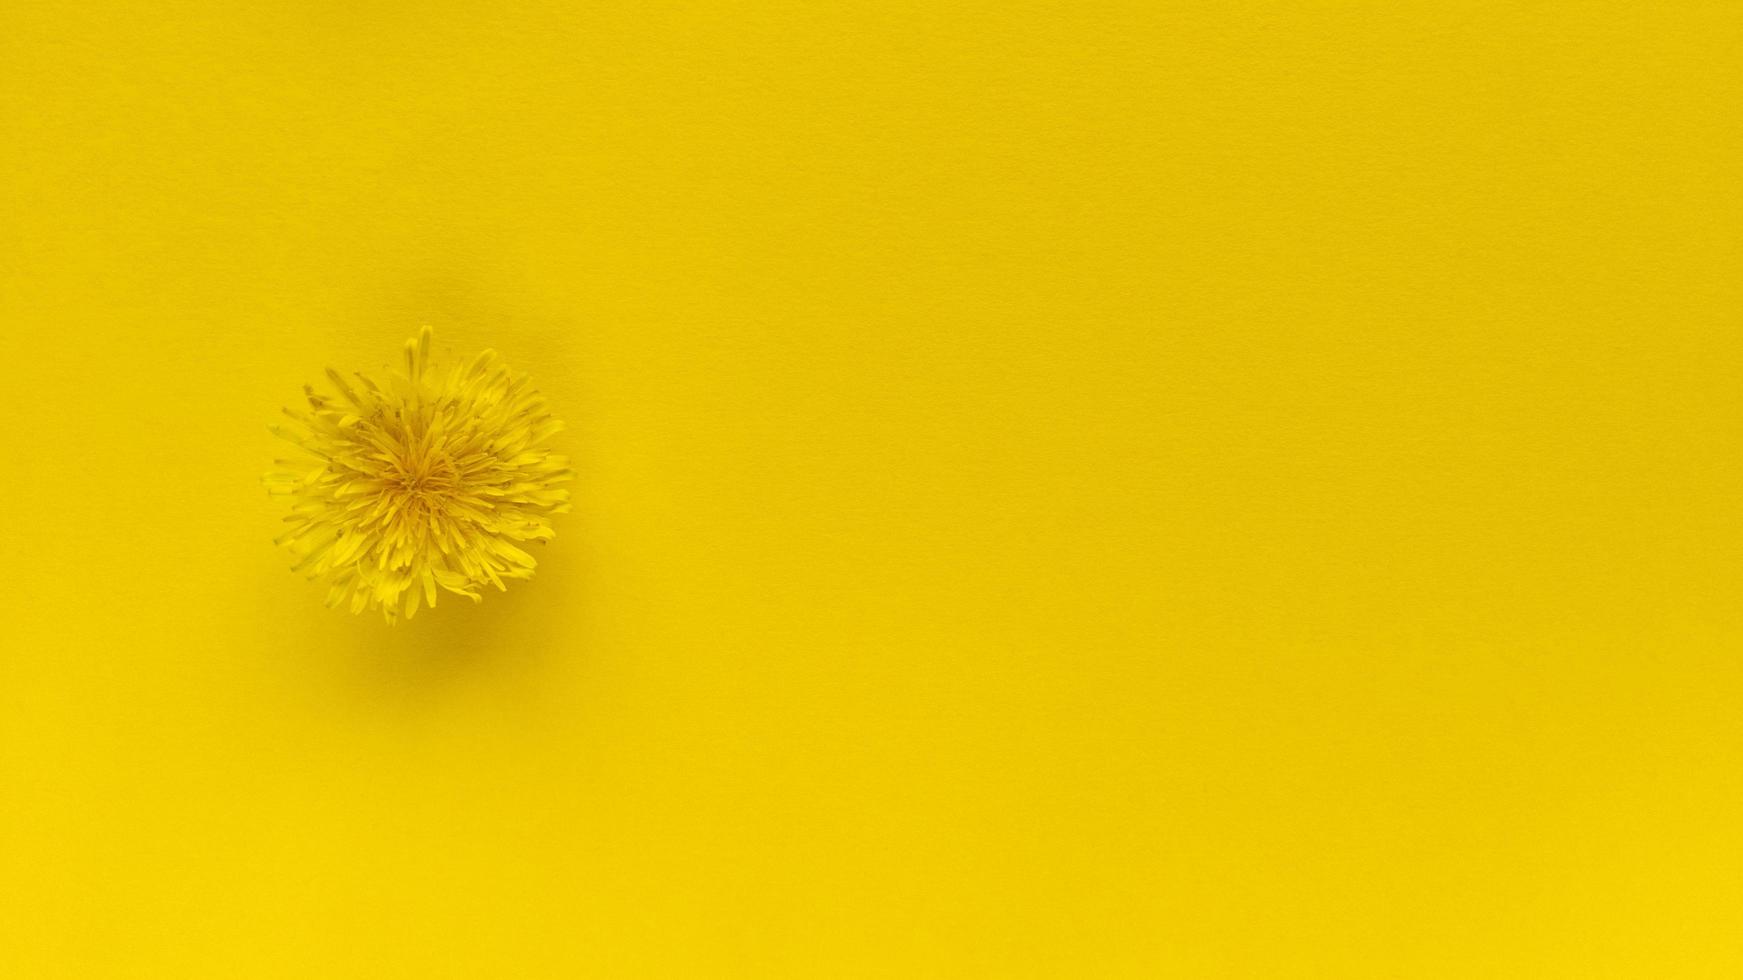 Yellow flower on yellow background. Monochrome simple flat lay with pastel texture. Fashion eco concept. Stock photo. photo